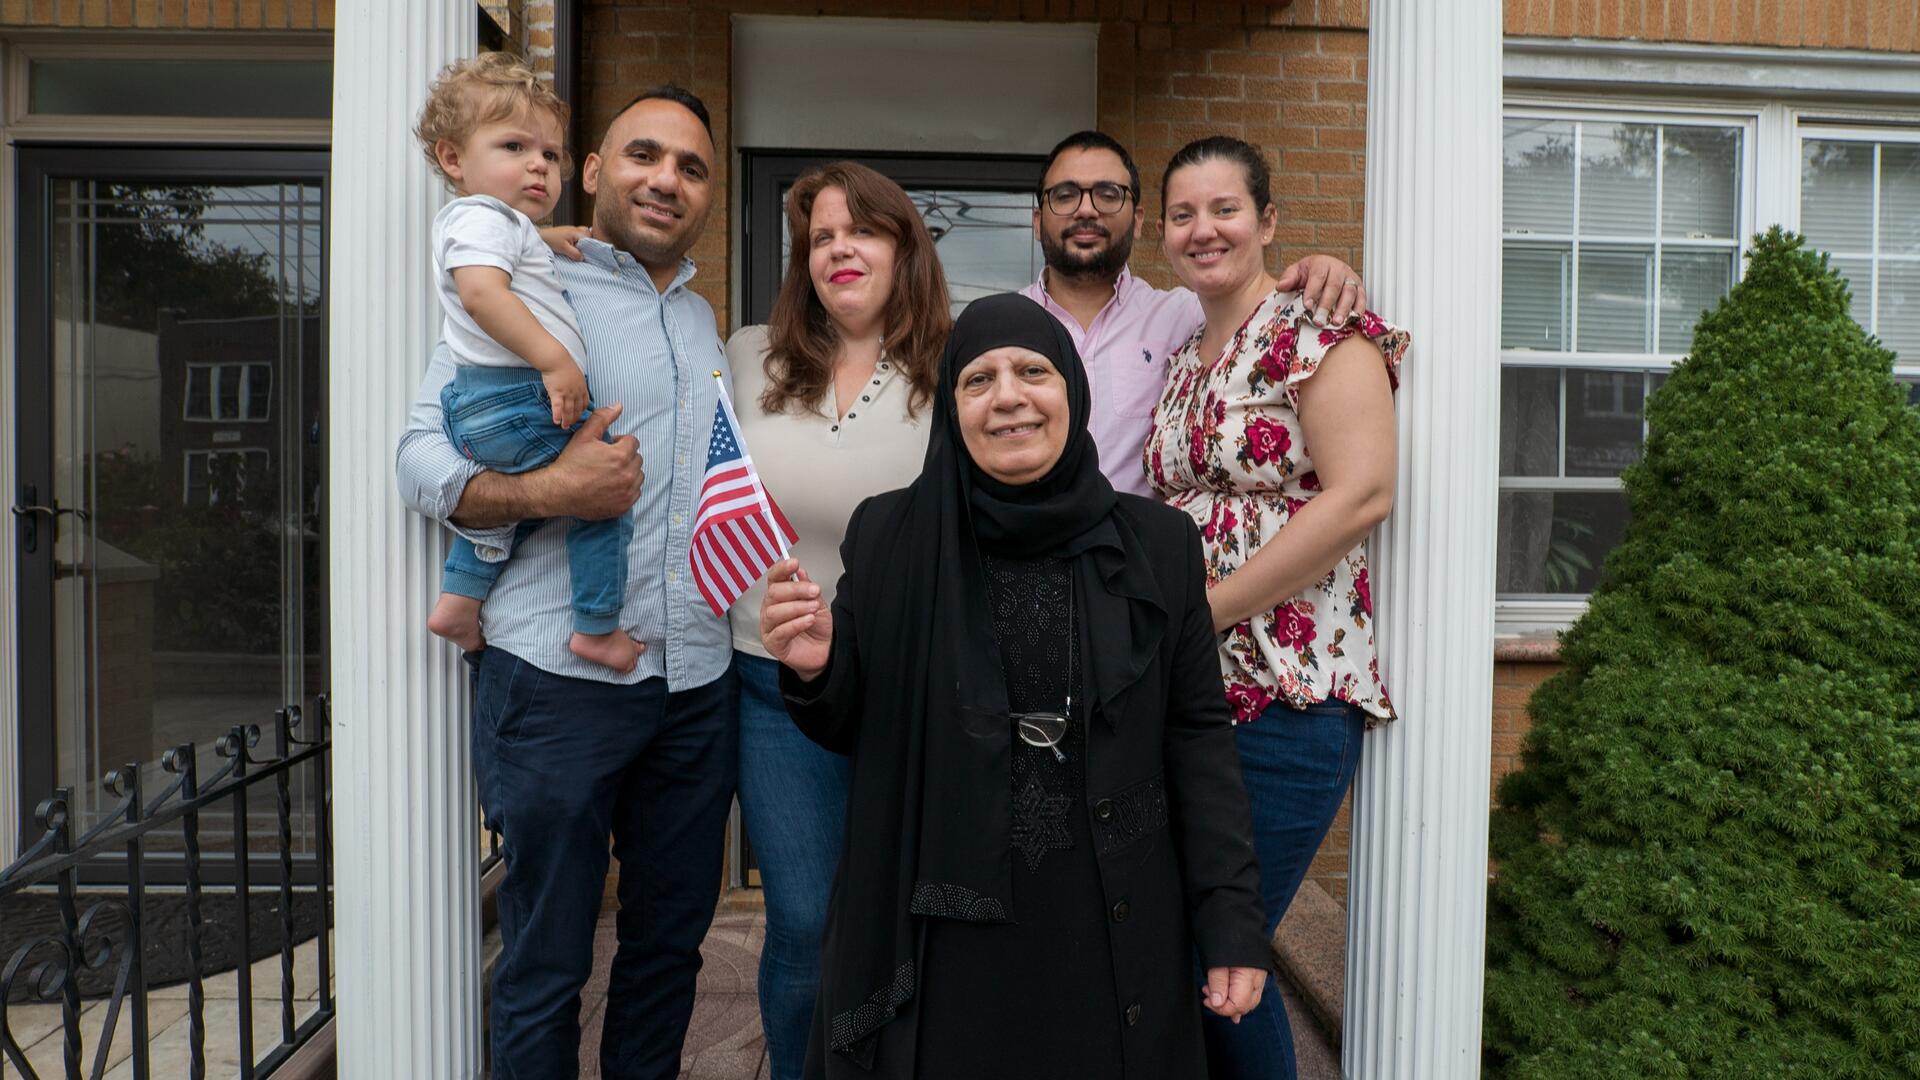 Maha al-Obaidi, a 66-year-old Iraqi woman, stands holding an American flag with her family on the porch of their home in New York City.